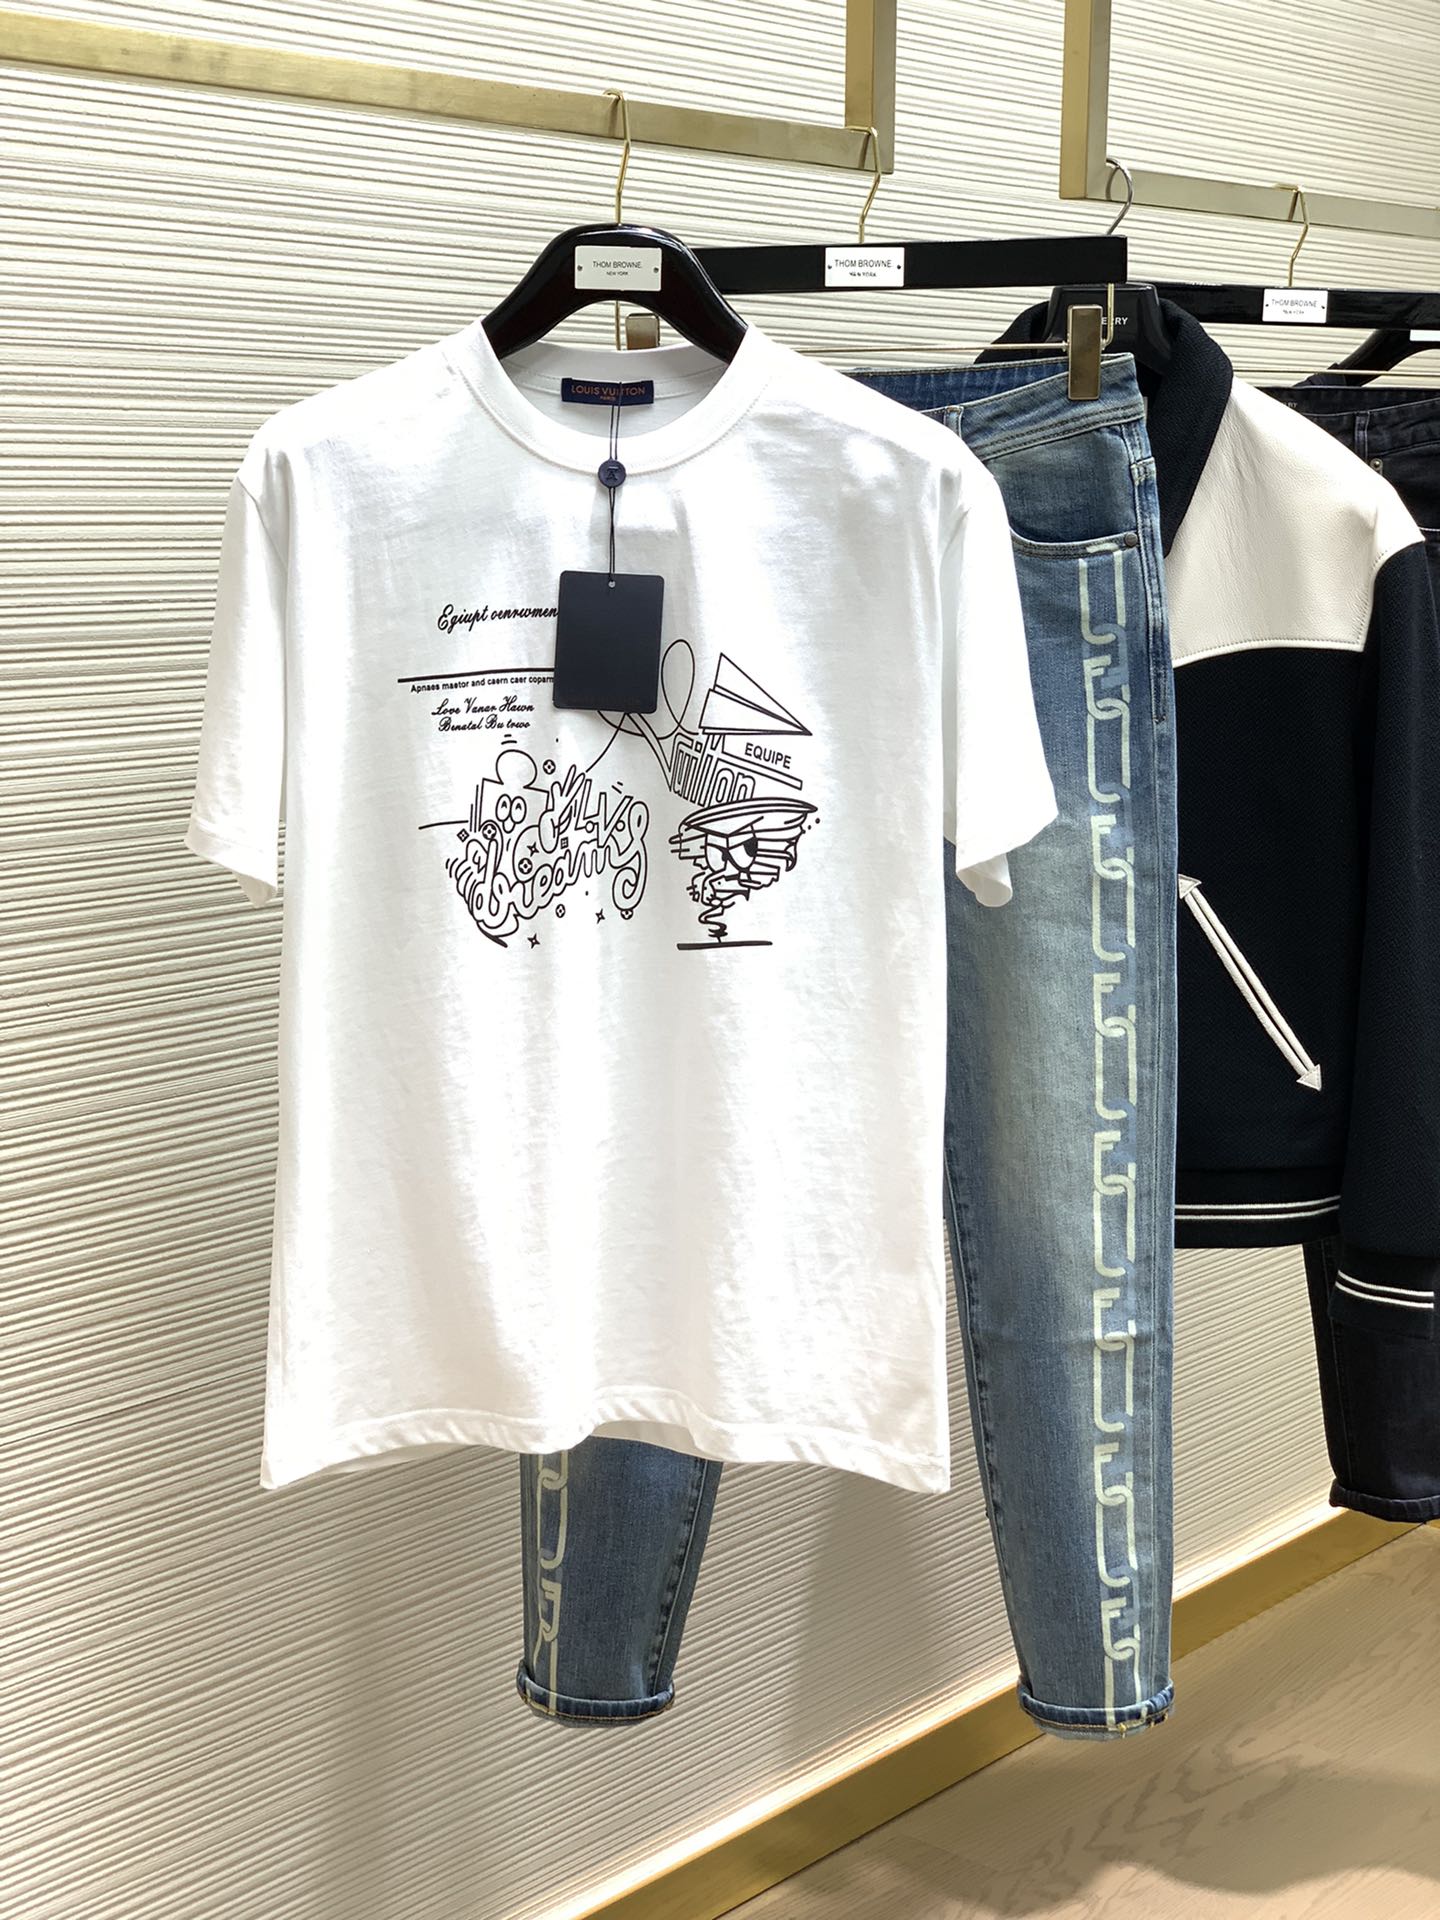 Louis Vuitton Clothing T-Shirt Printing Summer Collection Fashion Short Sleeve